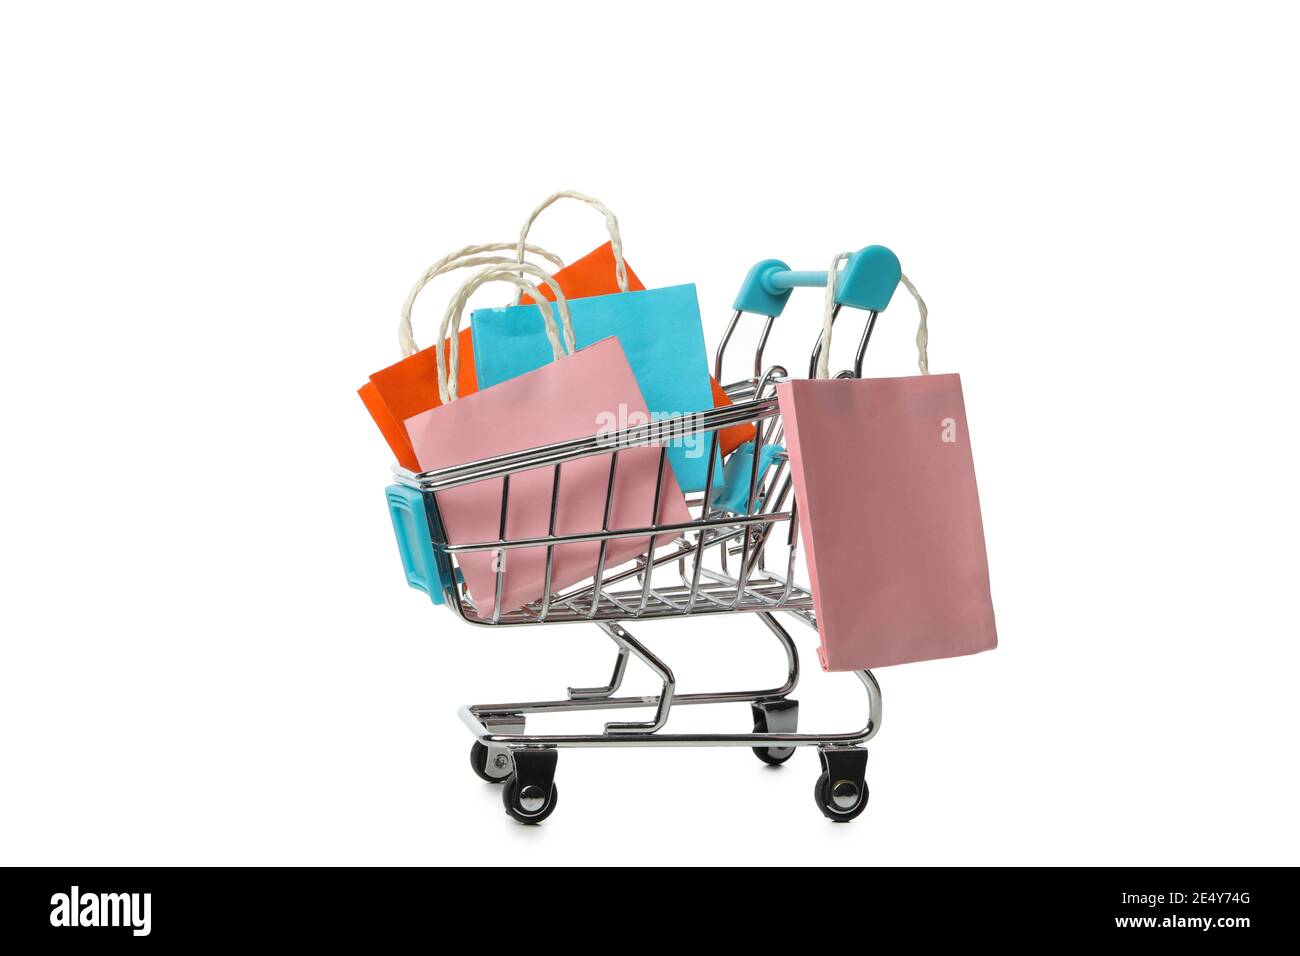 Shop cart with paper bags isolated on white background Stock Photo